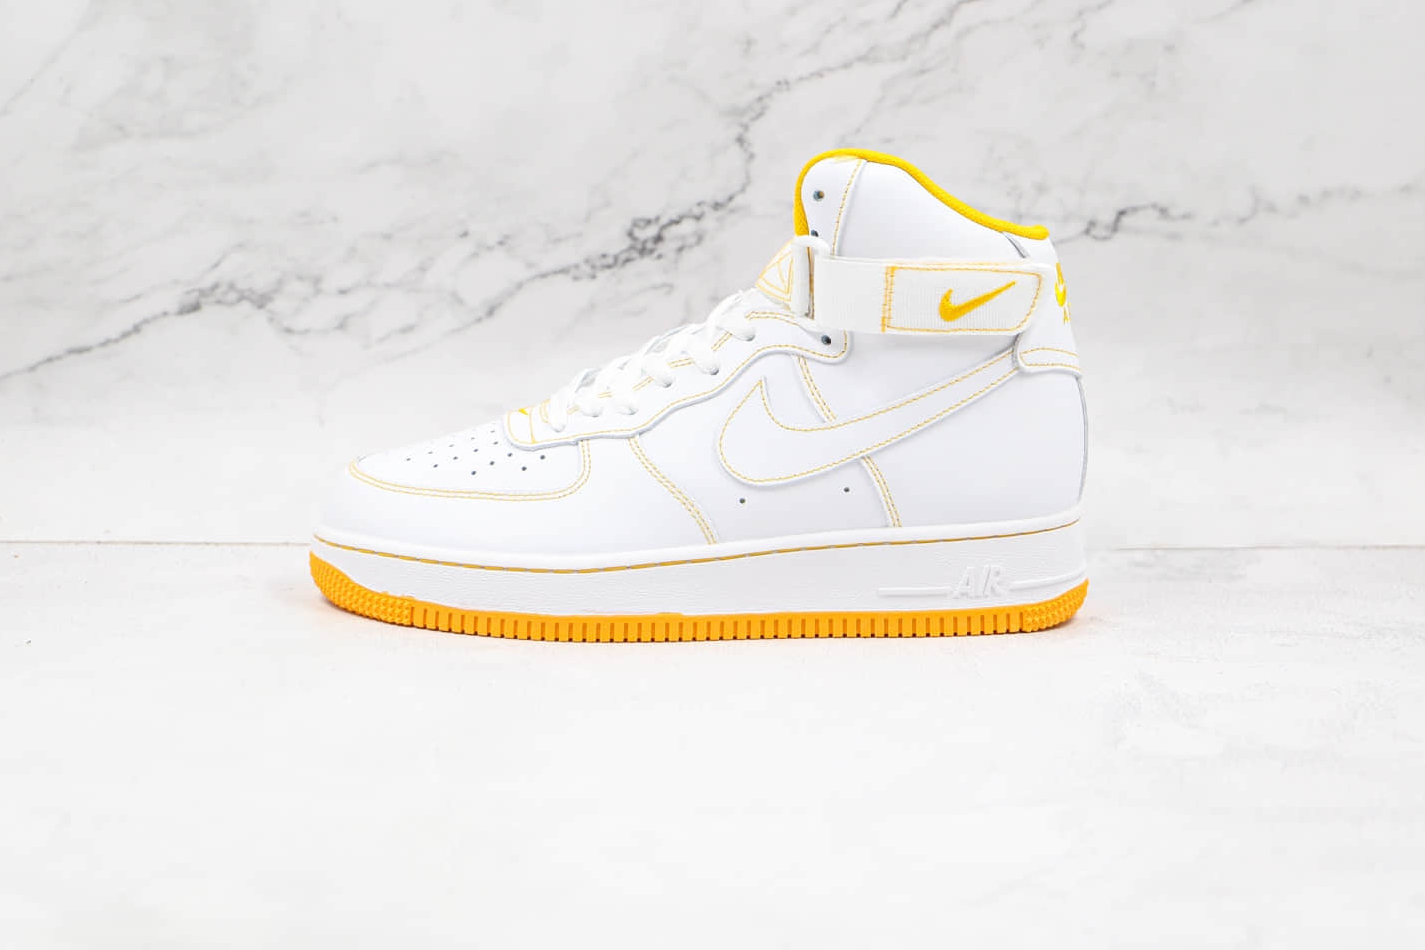 Nike Air Force 1 High '07 'Laser Orange' - CV1753-107: Premium Sneakers with Bold Style